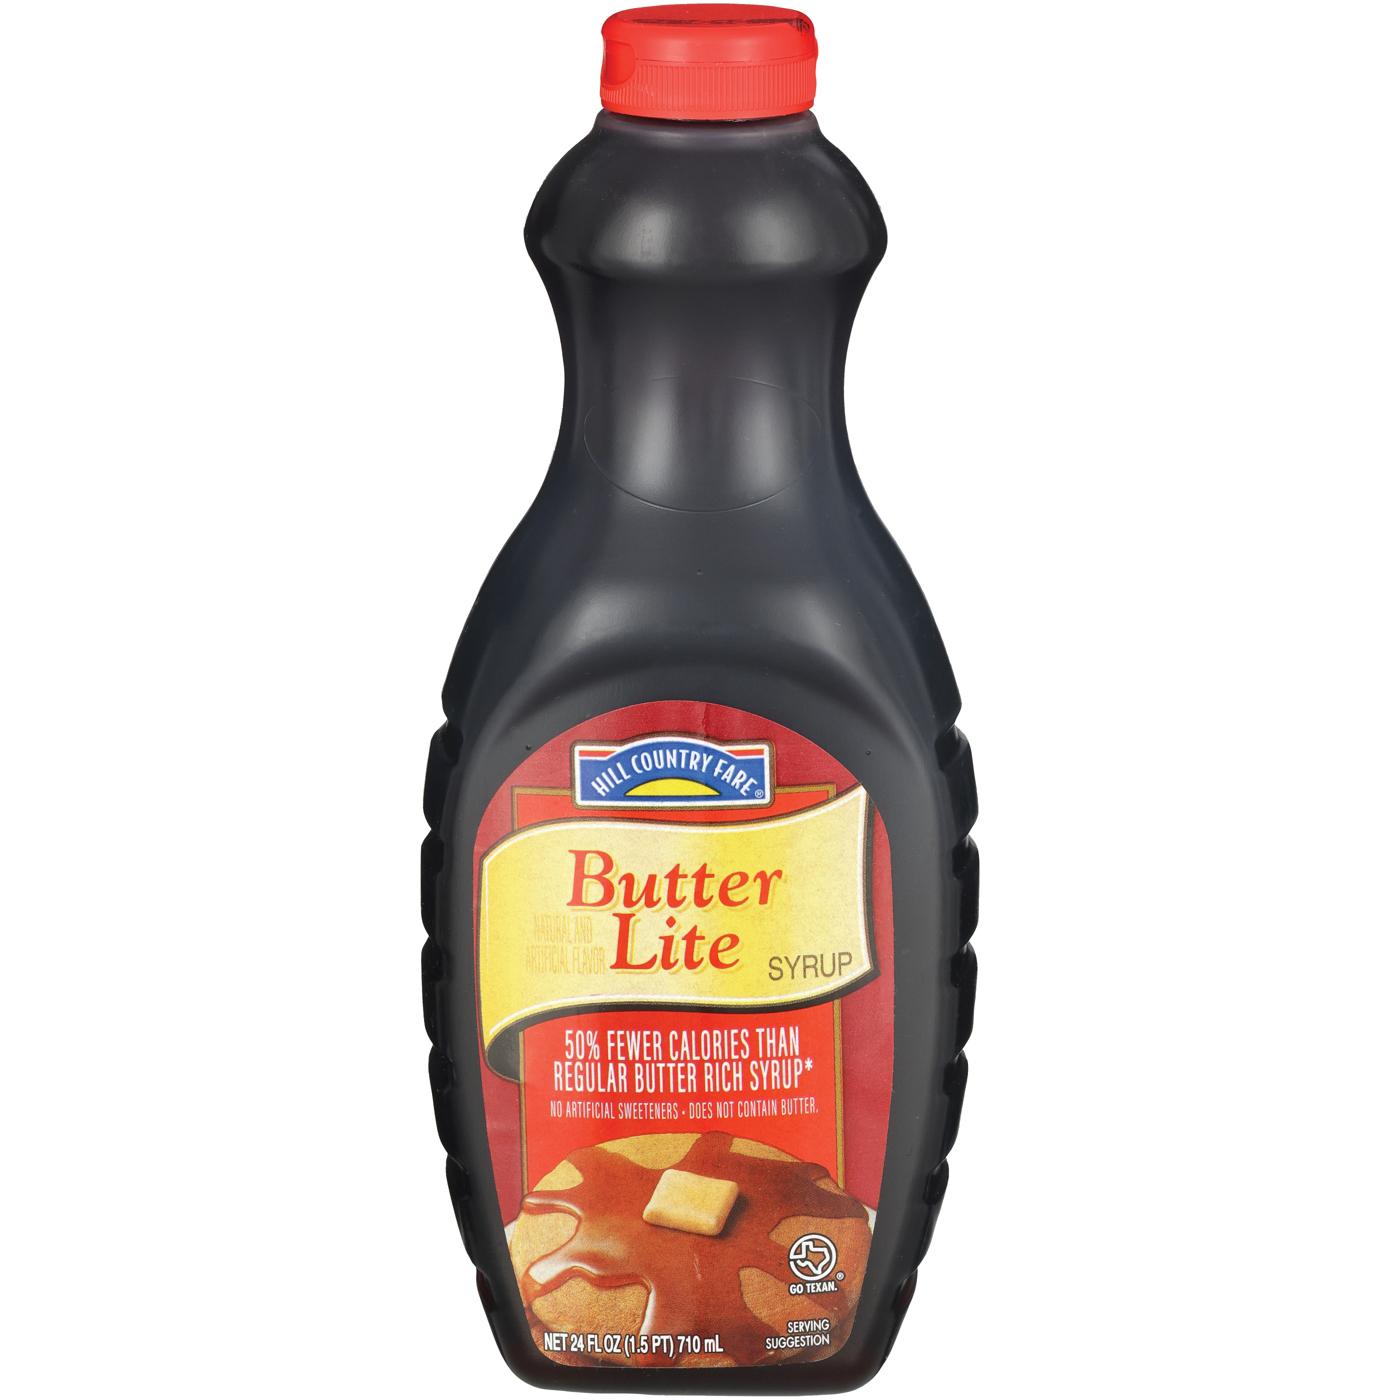 Hill Country Fare Butter Lite Syrup; image 2 of 2